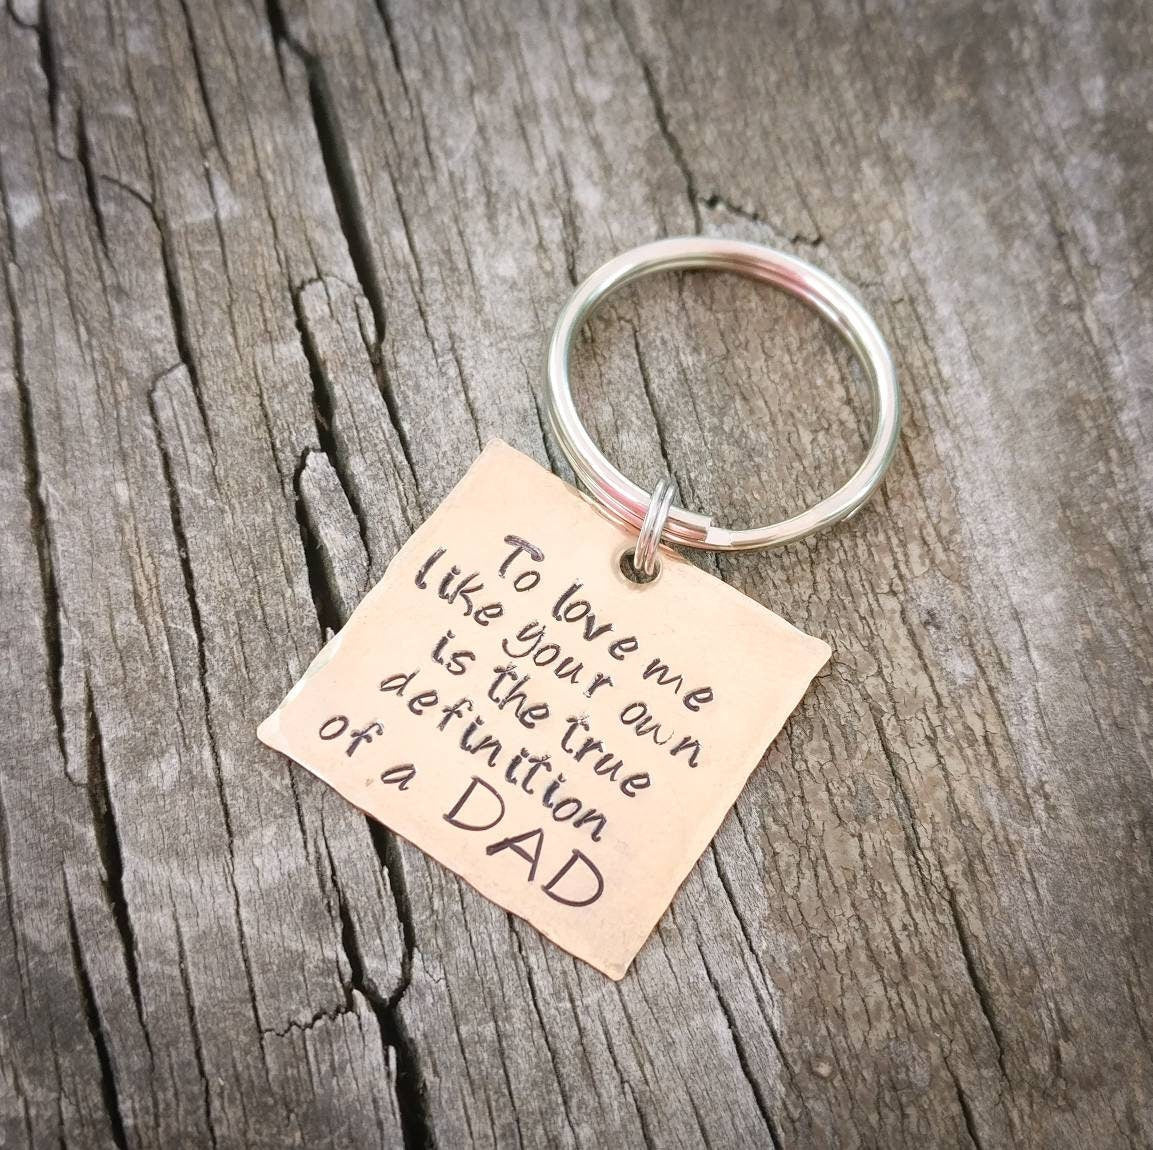 Father's Day Keychain for Step Dad, Father's Day Gift For Stepdad, Father's Day gift for Stepdad, Keychain for Stepdad